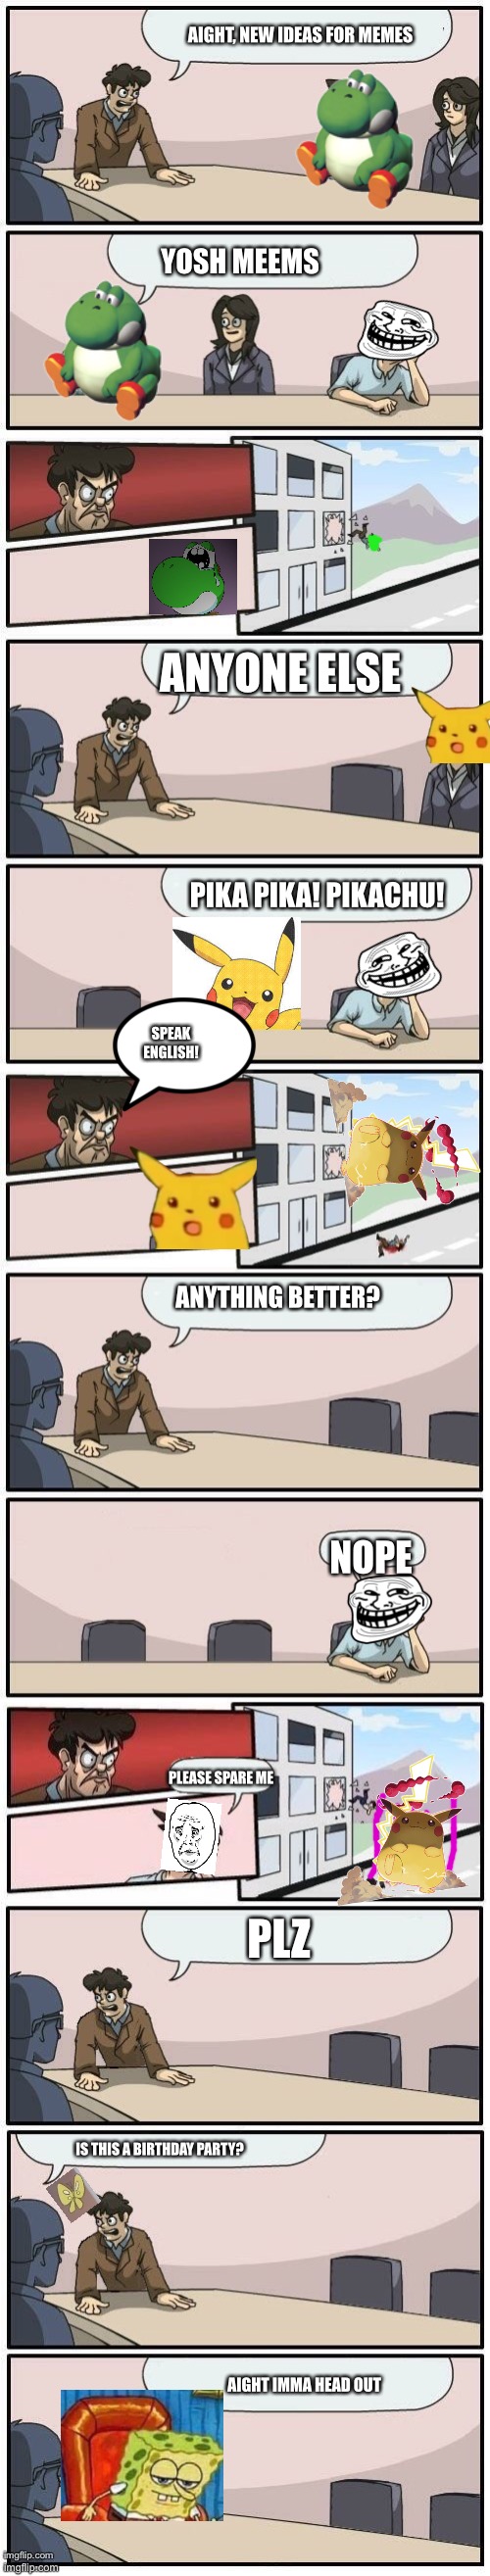 Boardroom Meeting Suggestions Extended | AIGHT, NEW IDEAS FOR MEMES; YOSH MEEMS; ANYONE ELSE; PIKA PIKA! PIKACHU! SPEAK ENGLISH! ANYTHING BETTER? NOPE; PLEASE SPARE ME; PLZ; IS THIS A BIRTHDAY PARTY? AIGHT IMMA HEAD OUT | image tagged in boardroom meeting suggestions extended | made w/ Imgflip meme maker